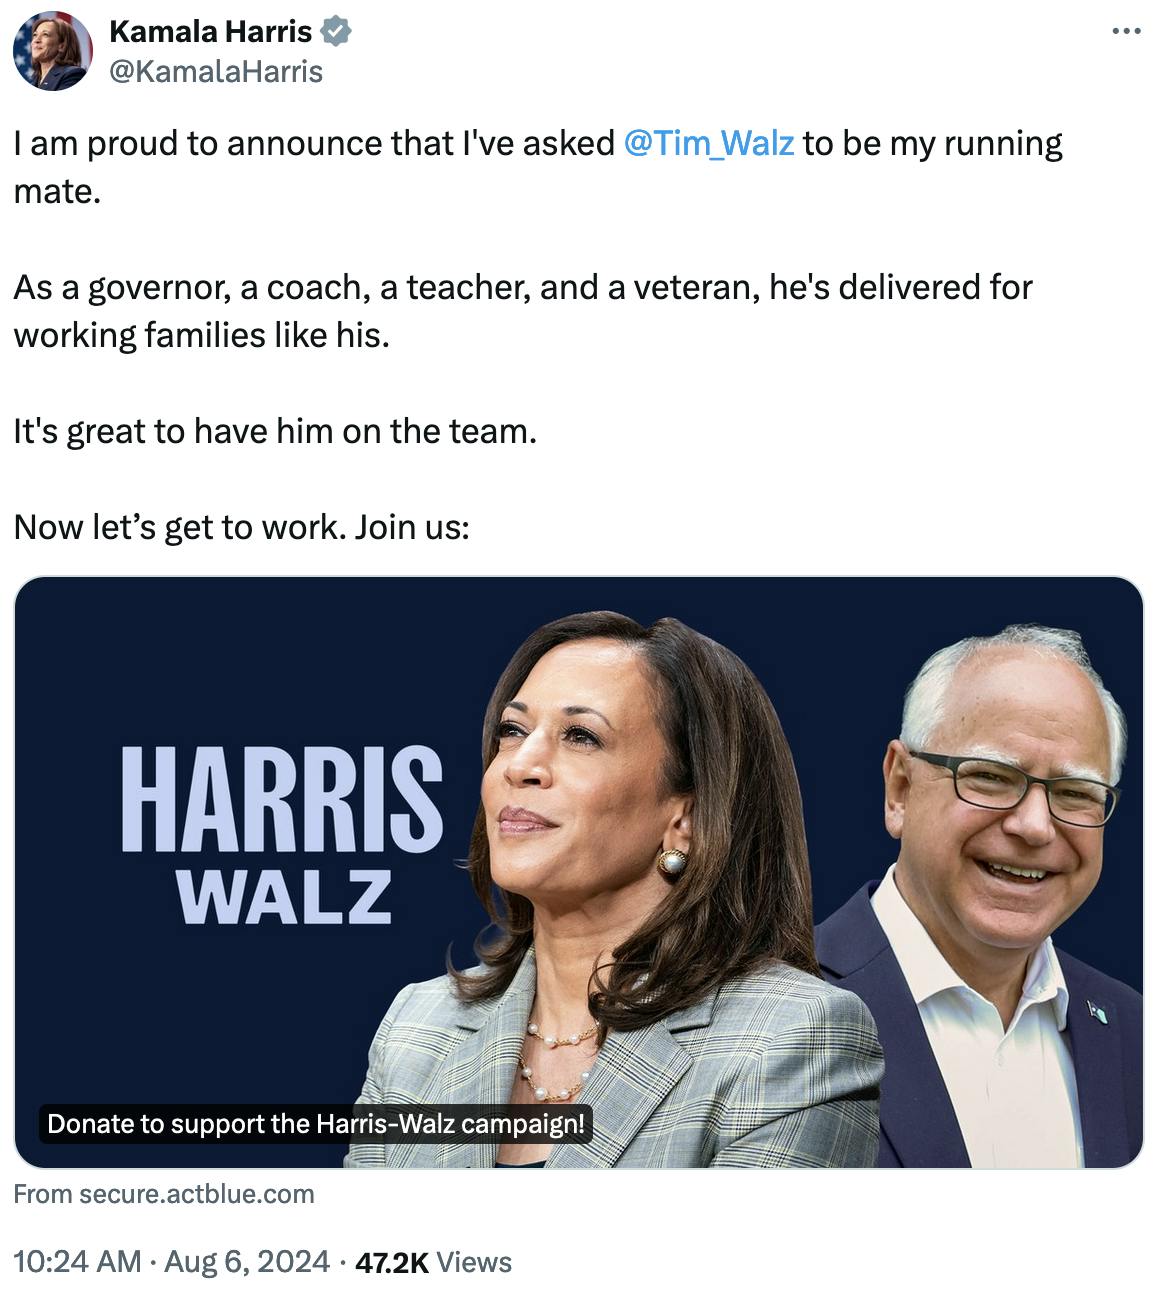 Who Is Tim Walz? The Man Who Memed His Way Into Becoming Kamala’s V.P.